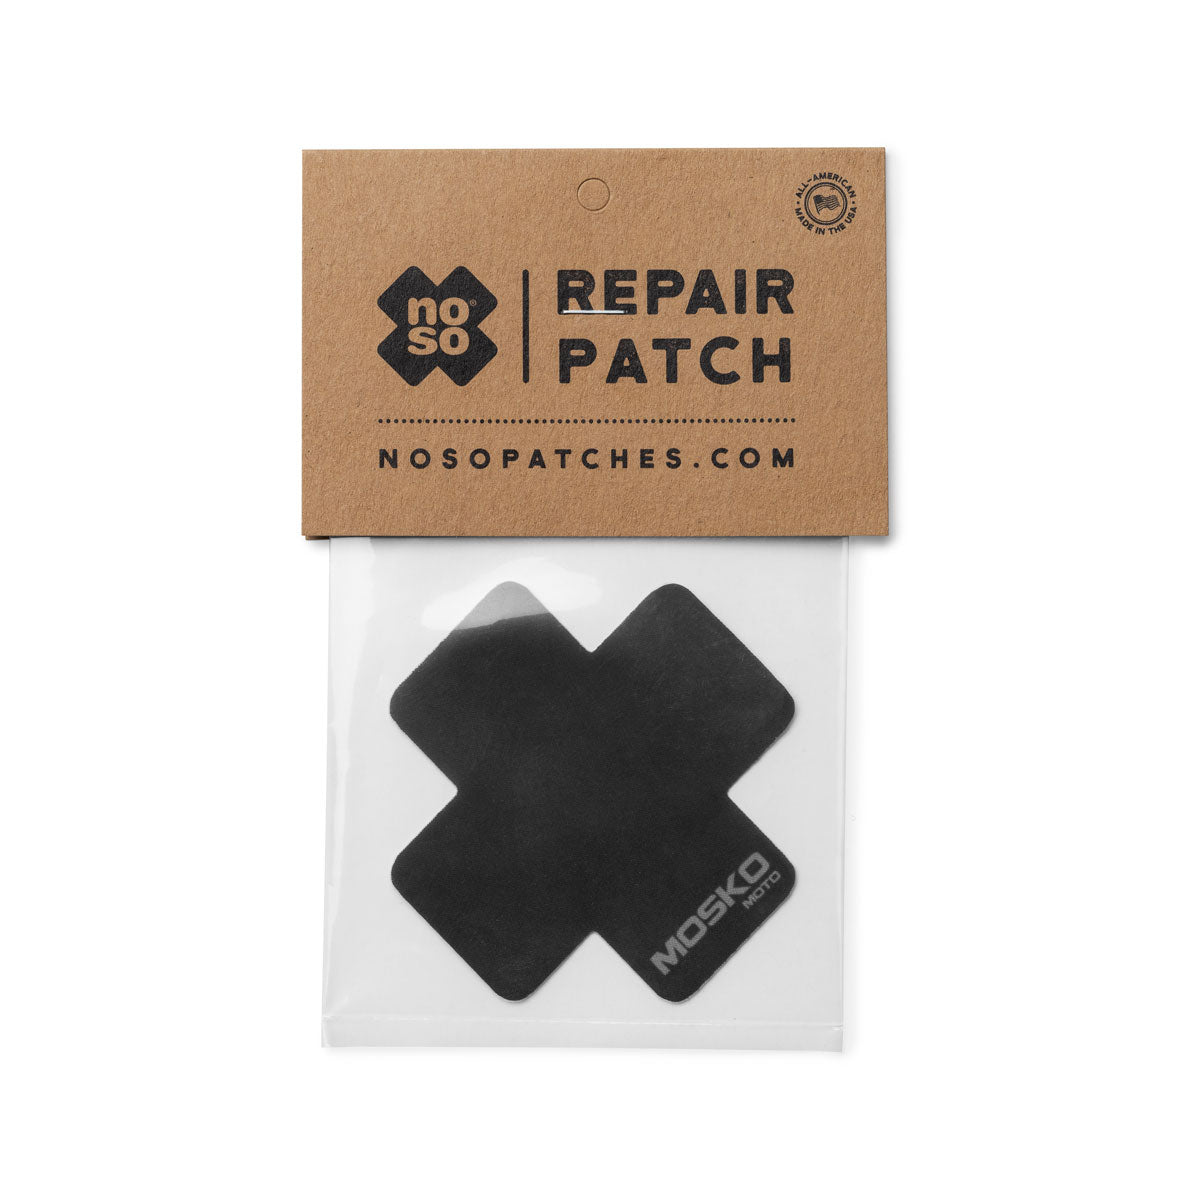 Noso Patches - The Noso Repairy's saving gear and making